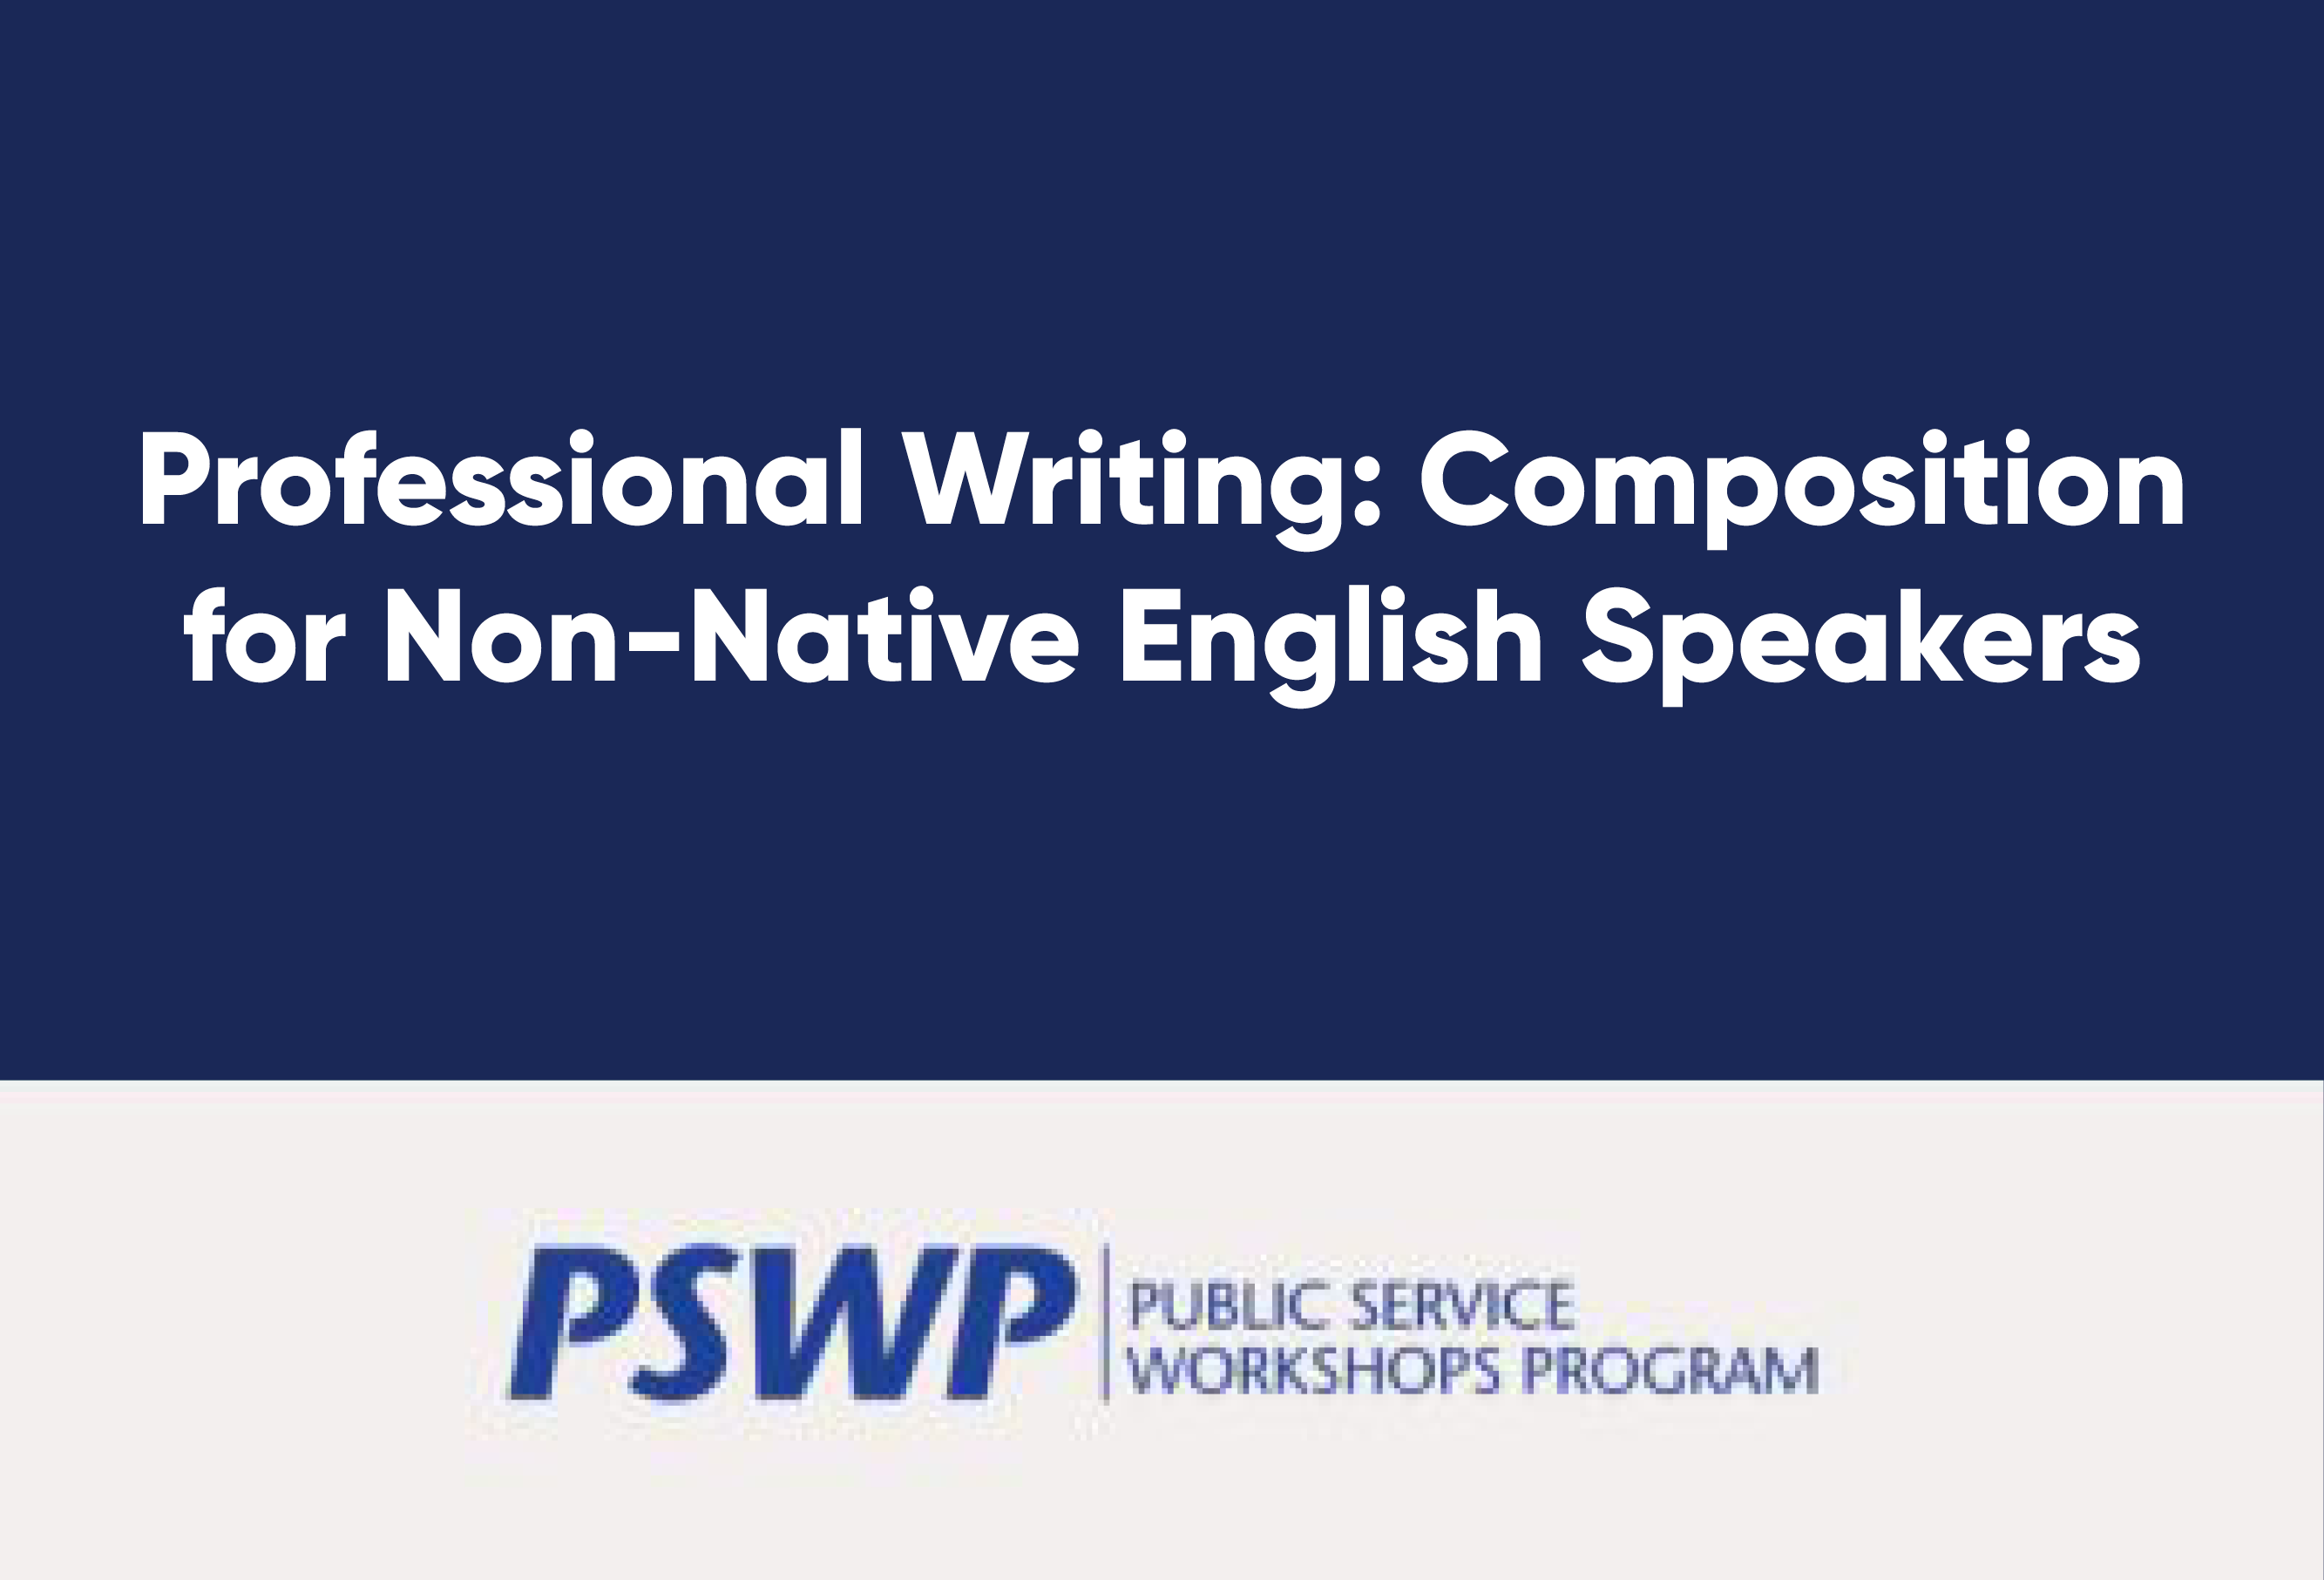 May 15: Professional Writing: Composition for Non-Native English Speakers